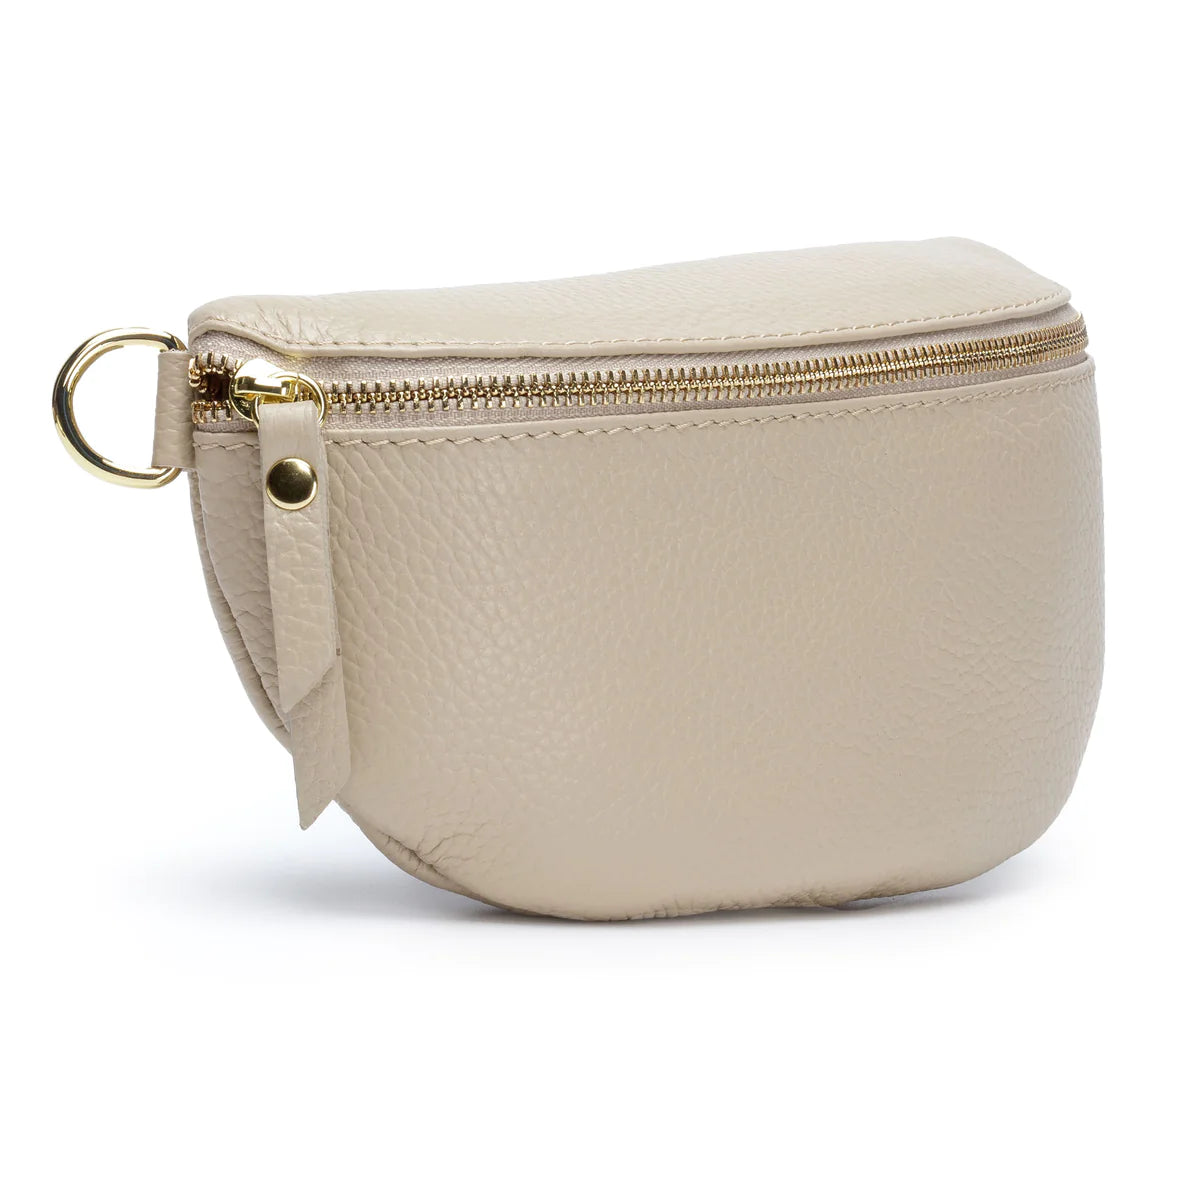 Stone Elie Beaumont Leather Sling Bag